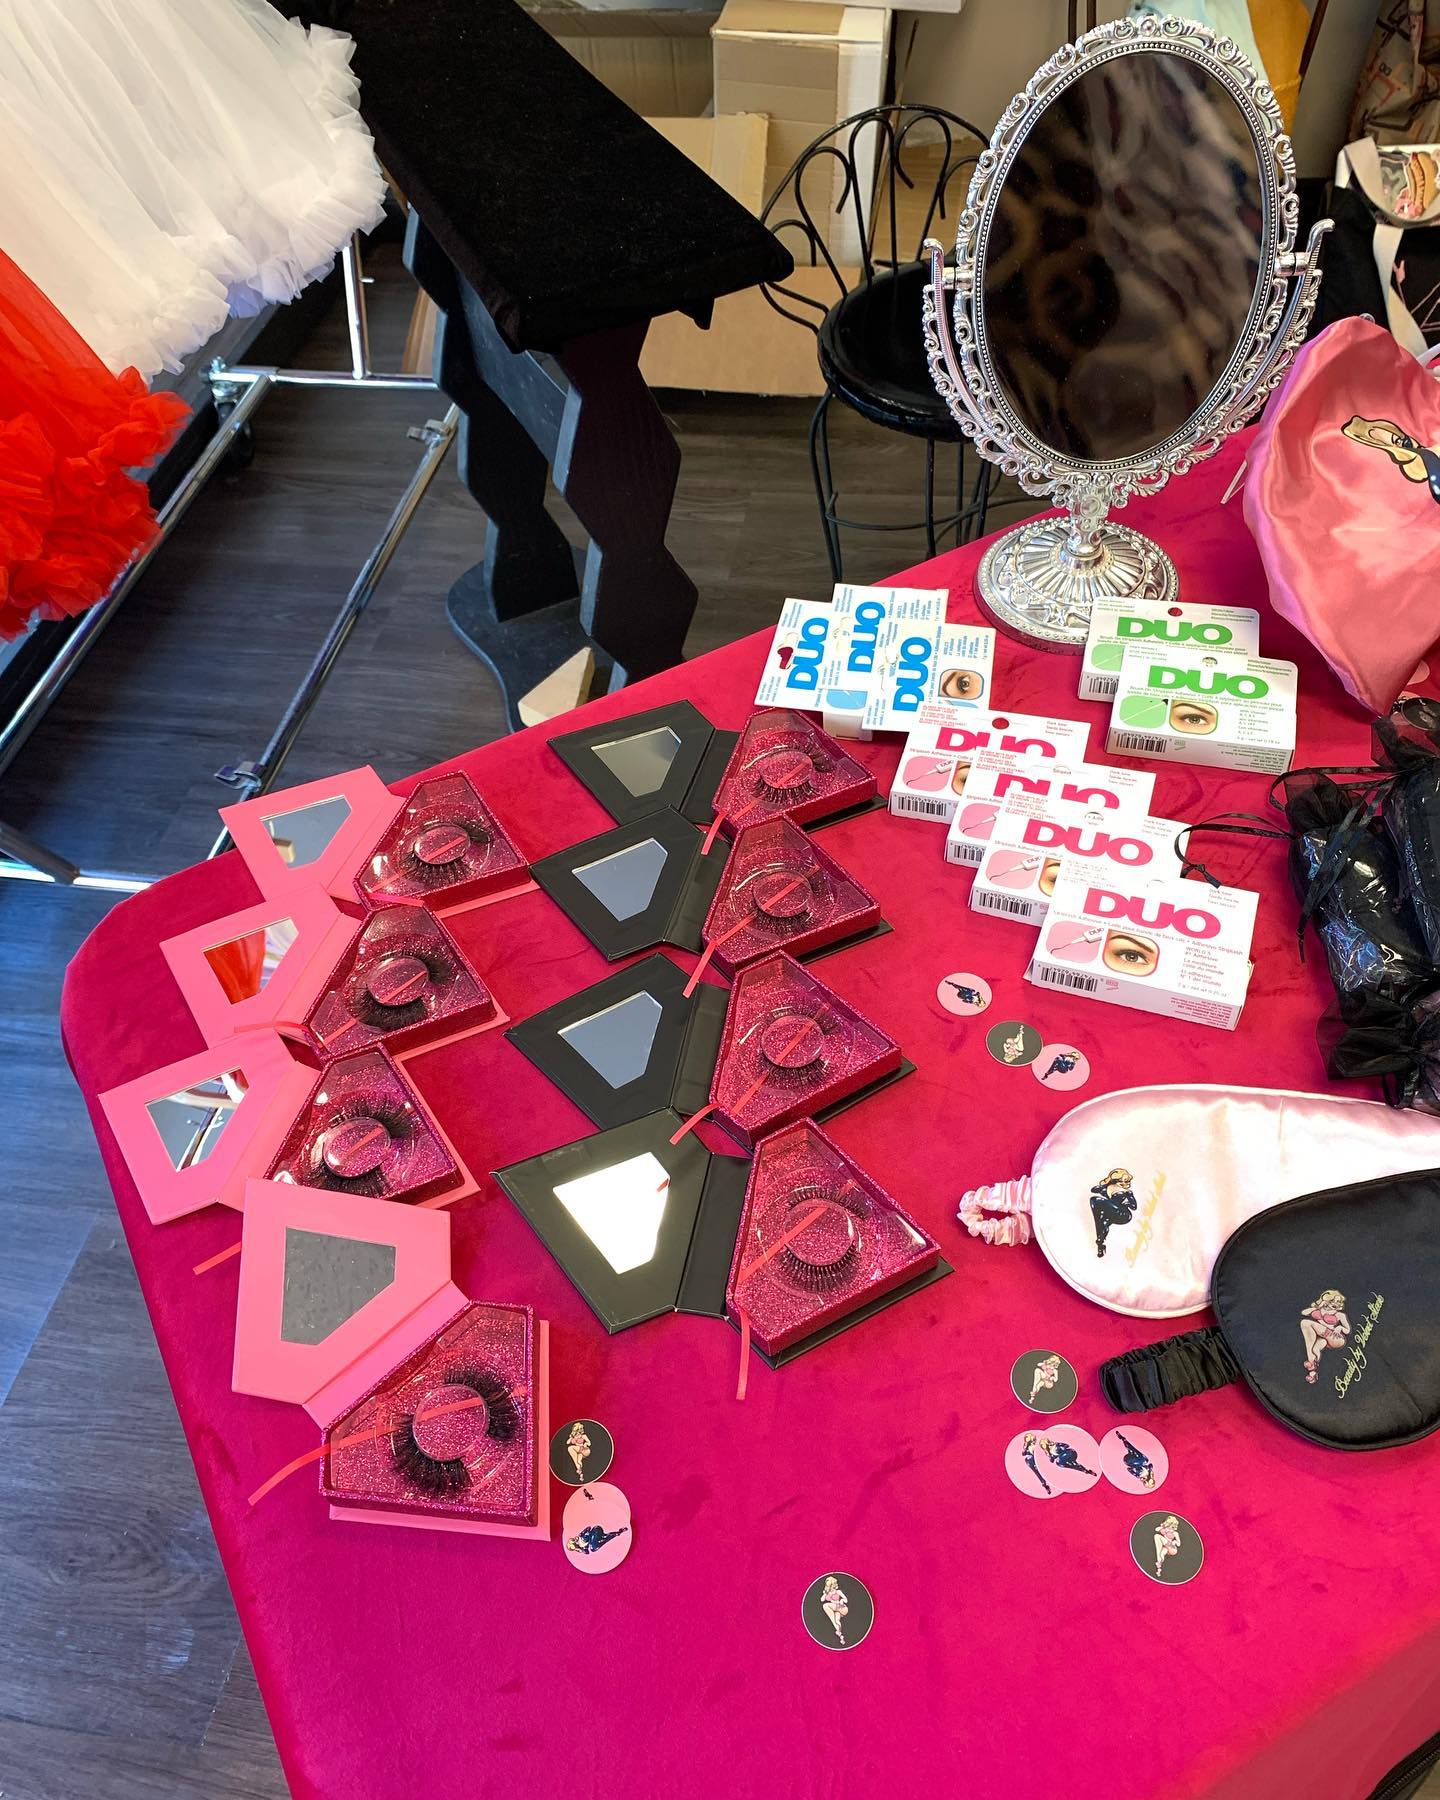 Come on down and see what’s up! #eyelashfashions #sleepmasks #hairbonnets #jewelleryspiders and more! At @pinupcanada at 434 West Hastings St. From 12noon to 5pm 💞🖤💞